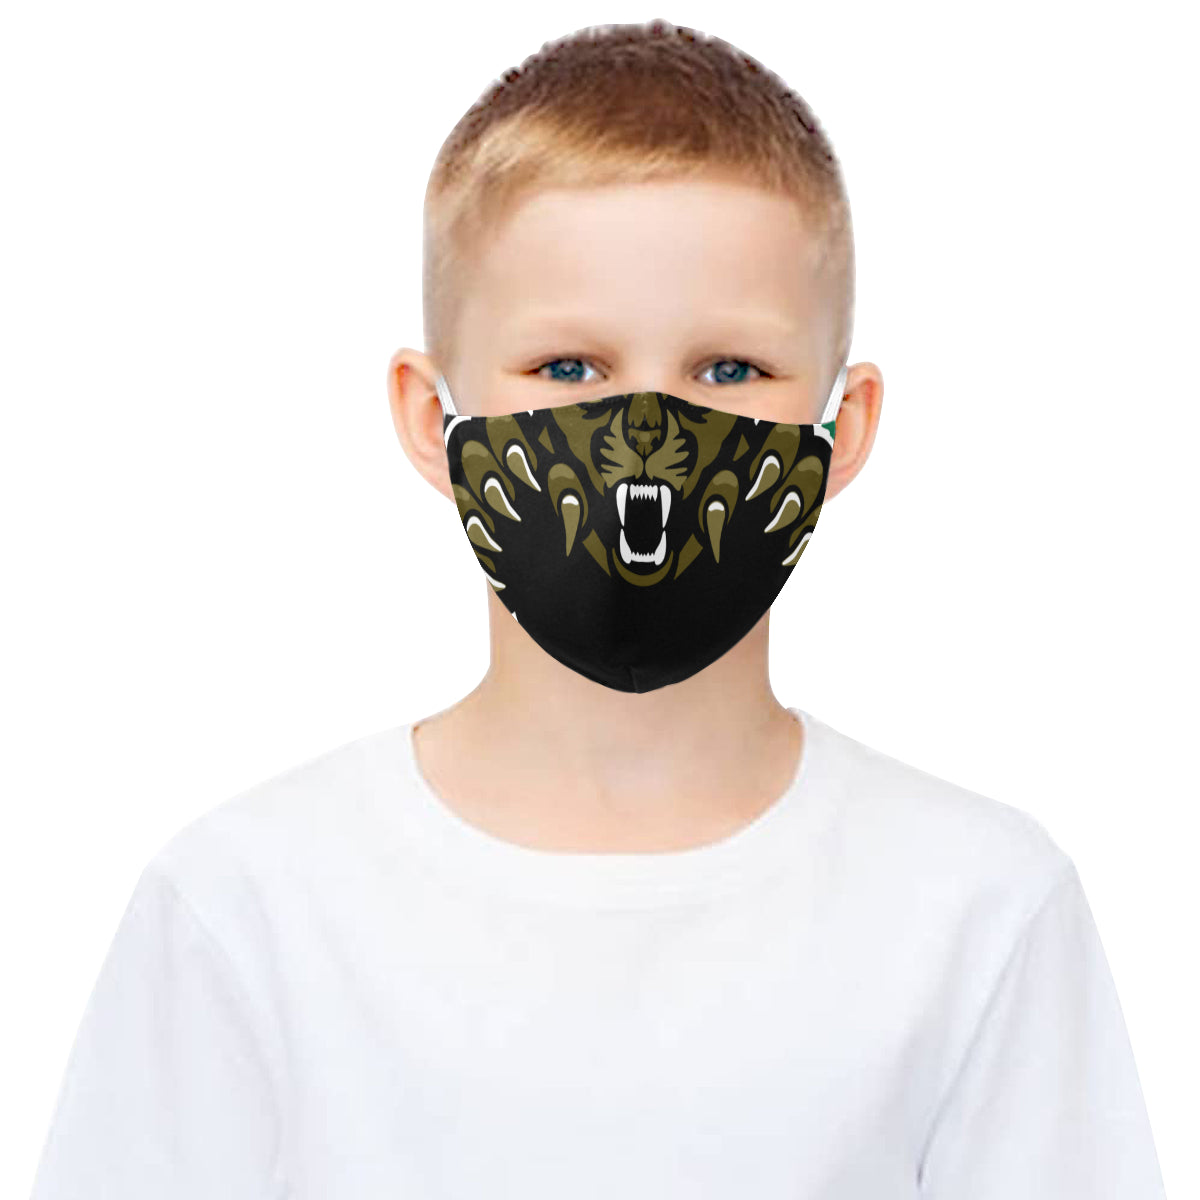 Panther Claw Cotton Fabric Face Mask with Filter Slot & Adjustable Strap - Non-medical use (2 Filters Included)